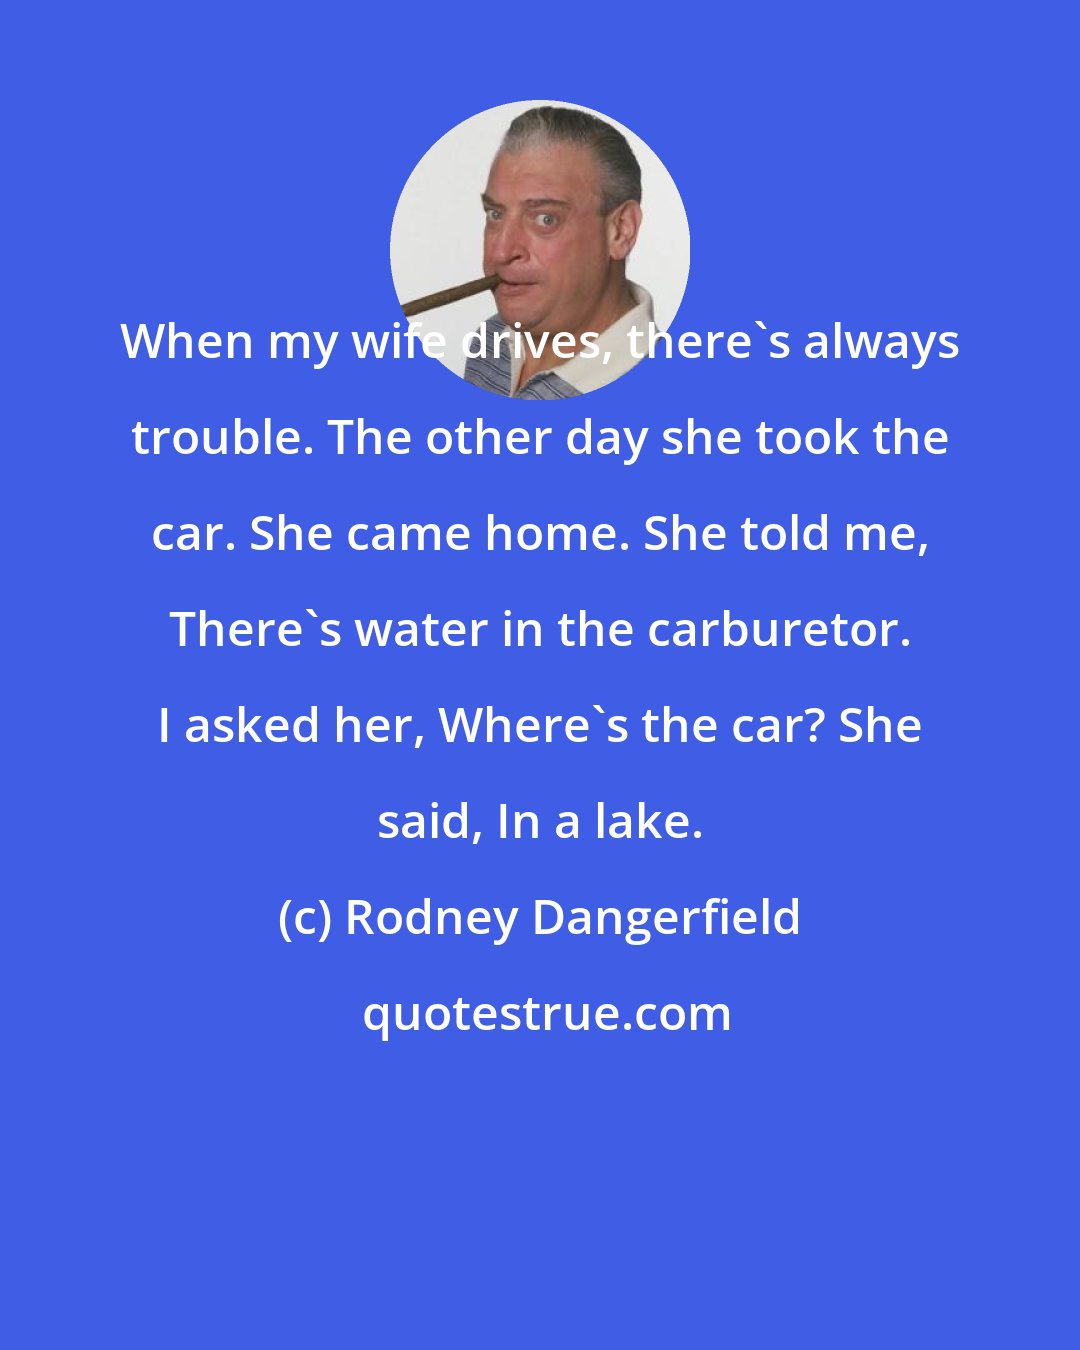 Rodney Dangerfield: When my wife drives, there's always trouble. The other day she took the car. She came home. She told me, There's water in the carburetor. I asked her, Where's the car? She said, In a lake.